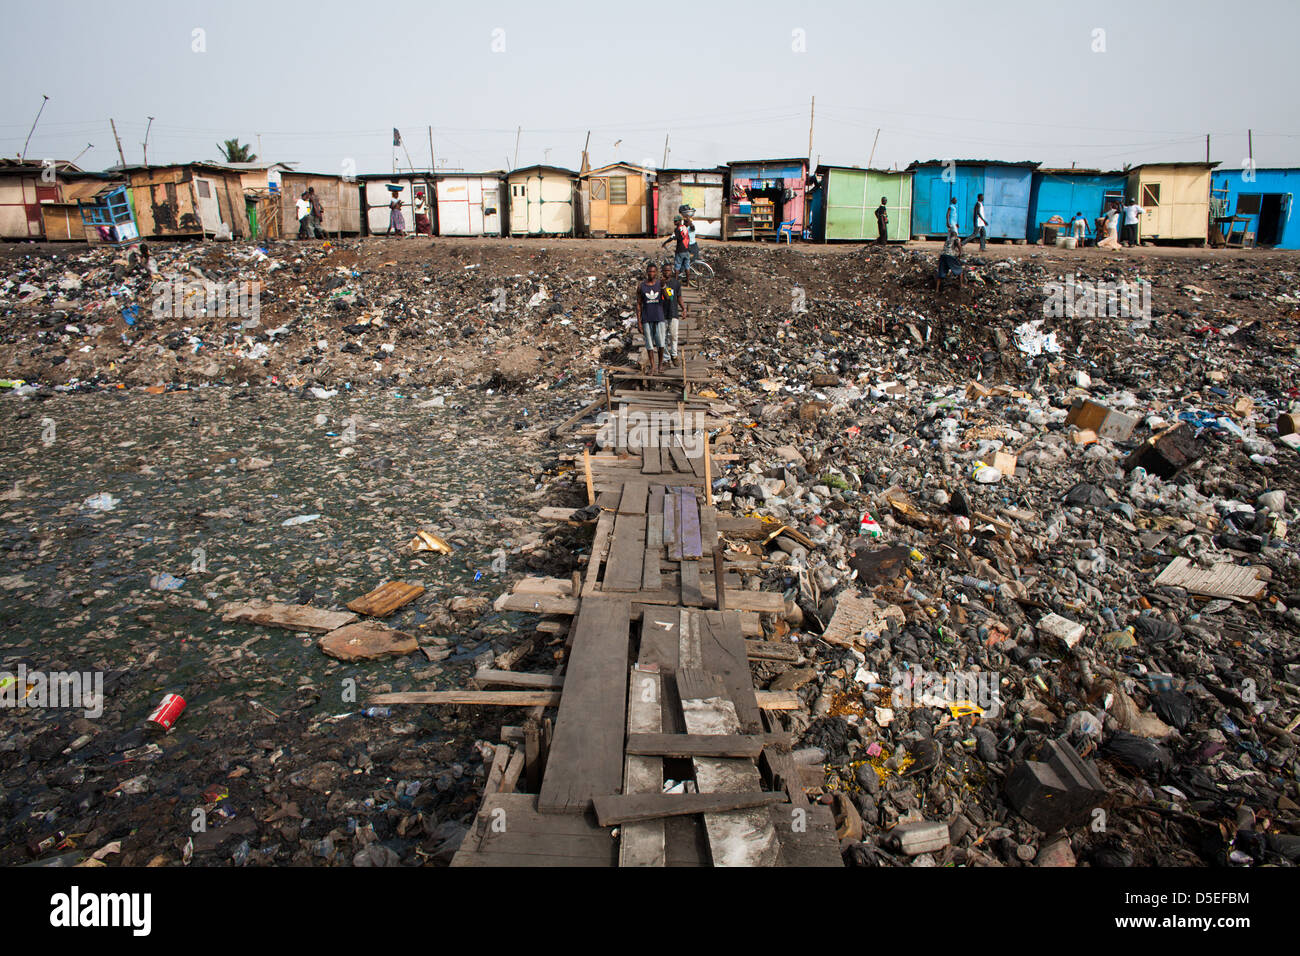 A heavily polluted river in the Agbogbloshie suburb of Accra, Ghana. Stock Photo